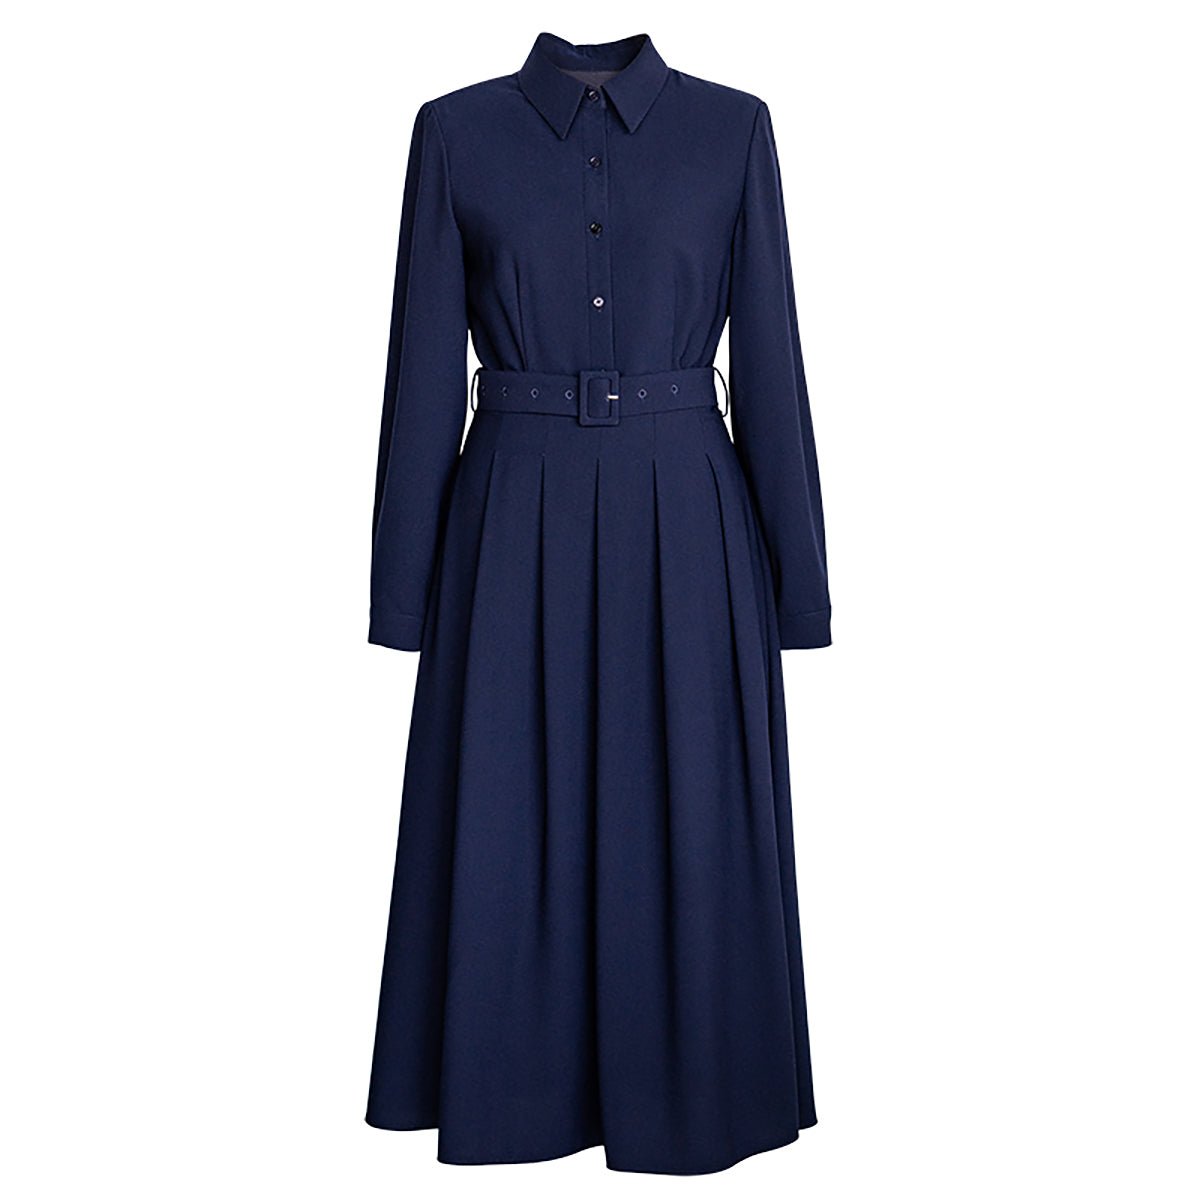 Buttoned Top Pleated Dress in Navy